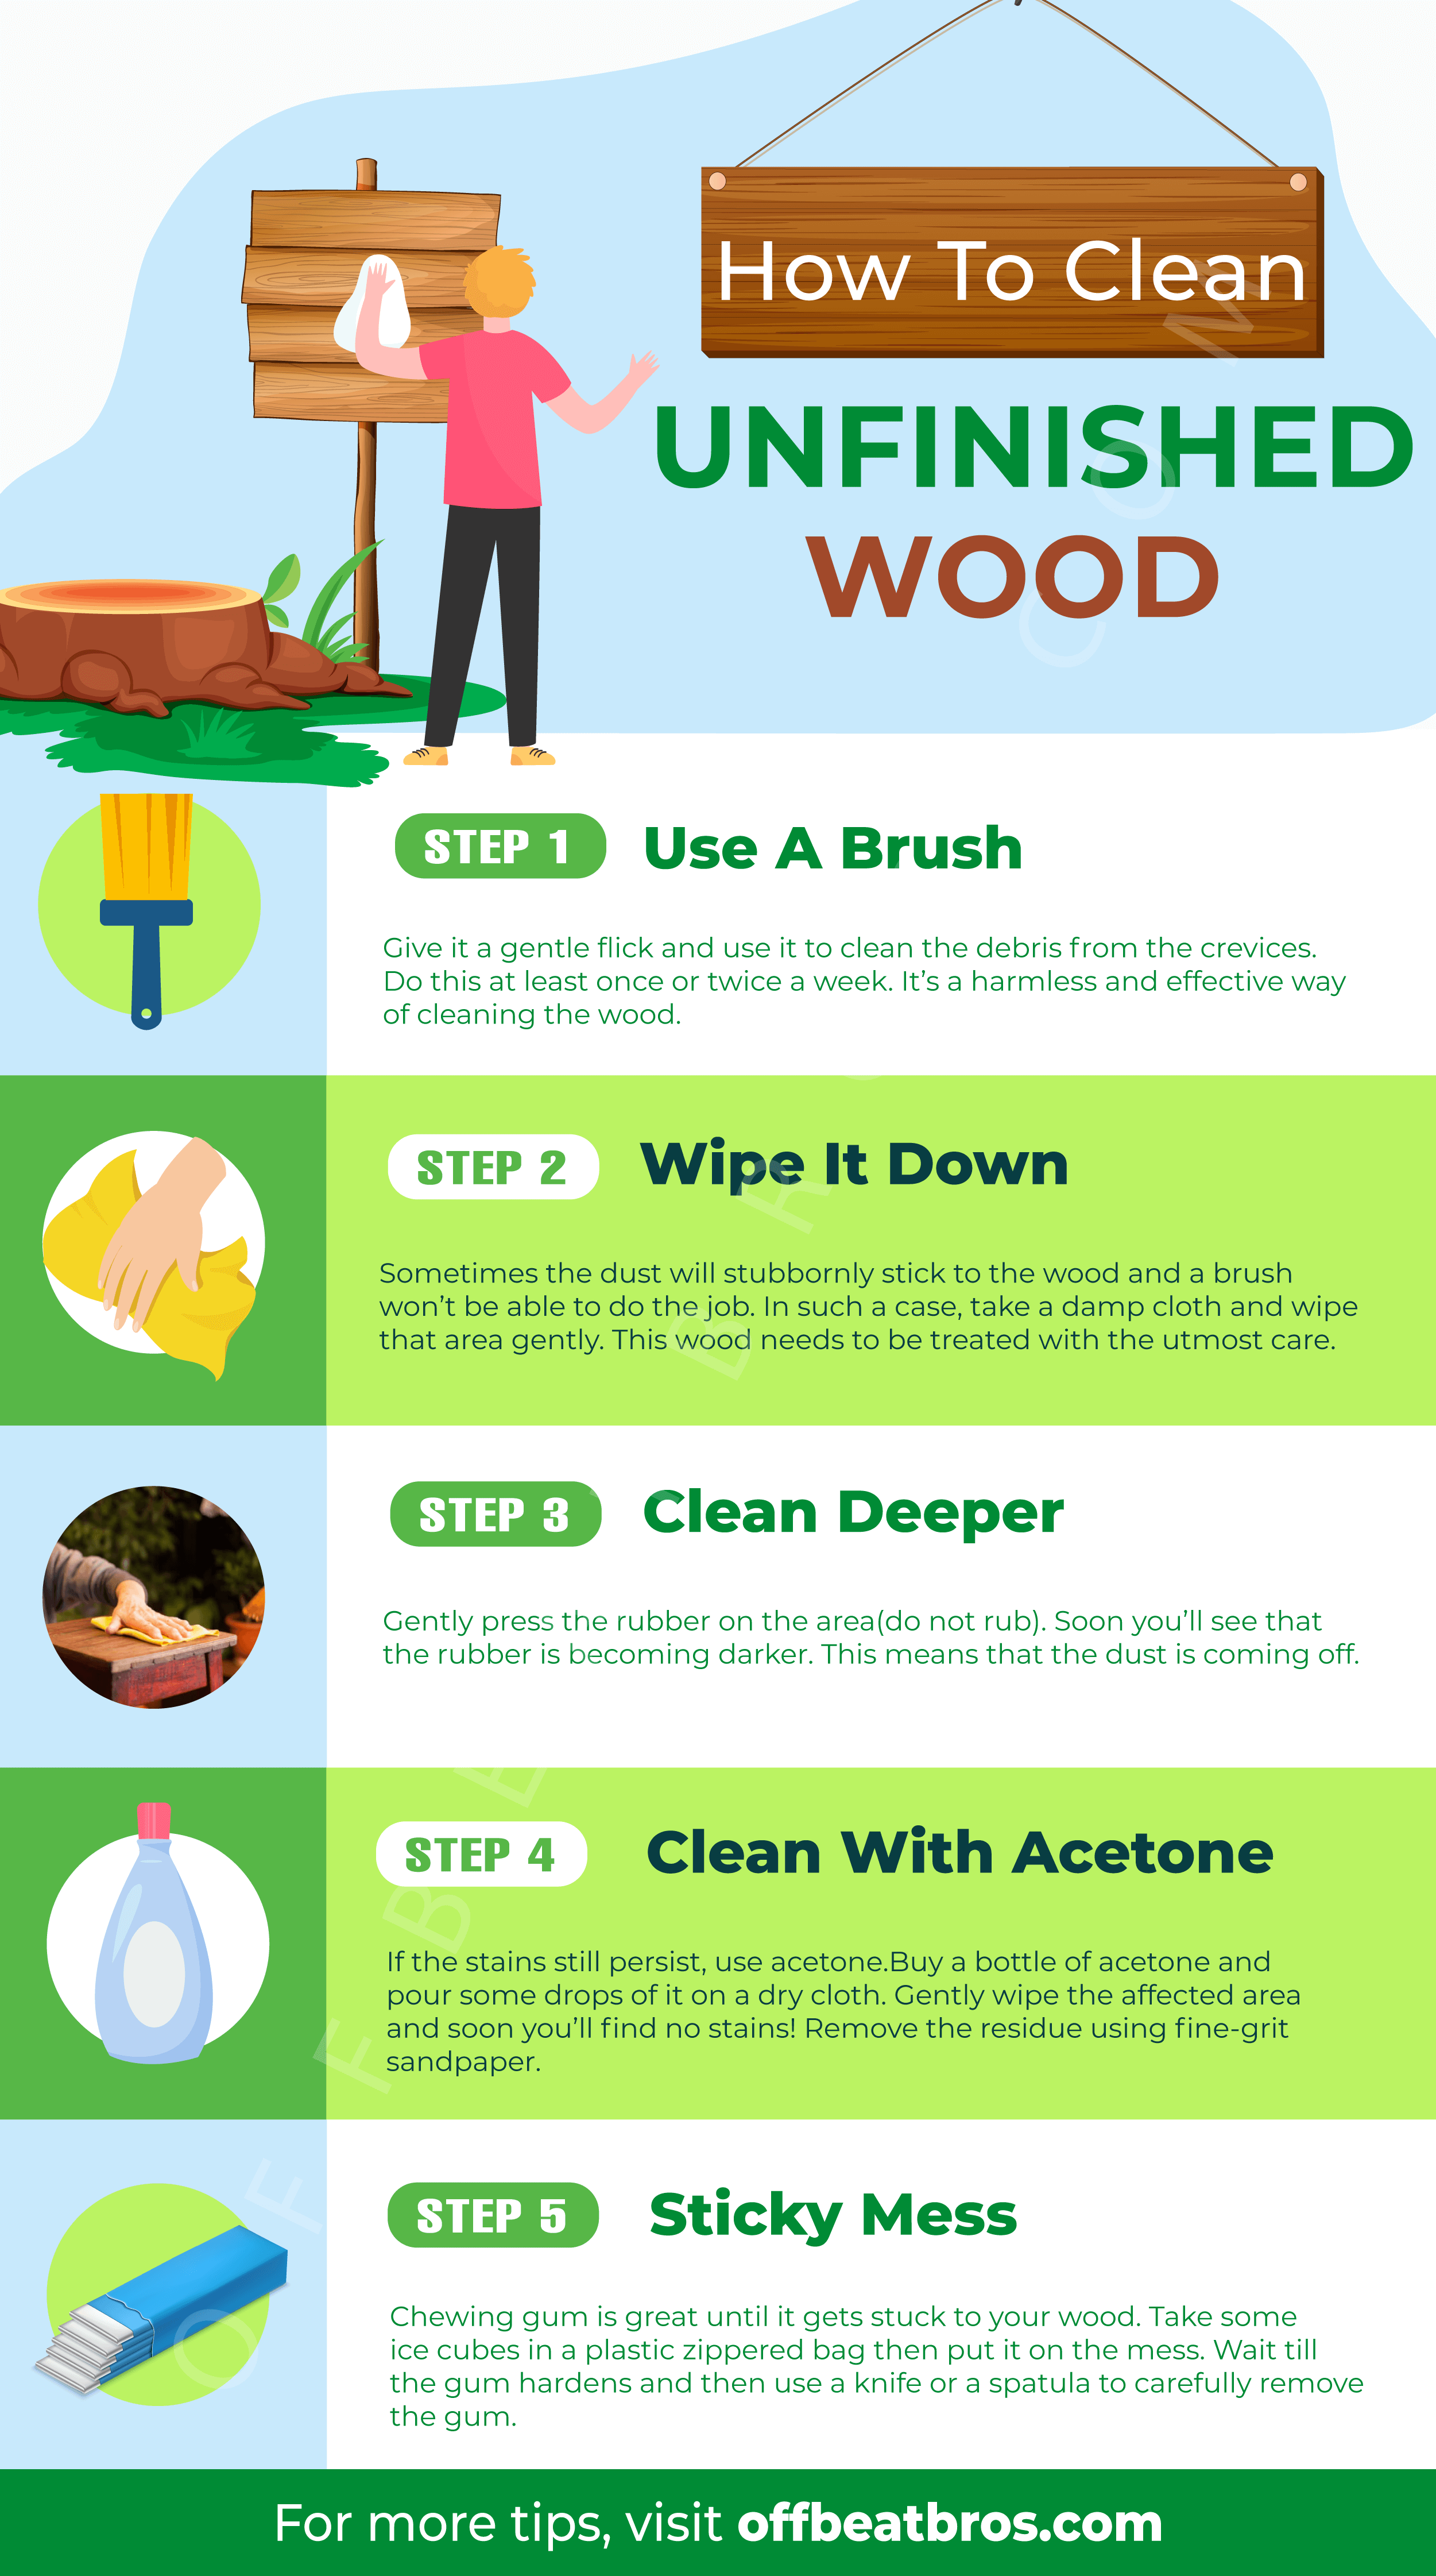 How To Clean Unfinished Wood